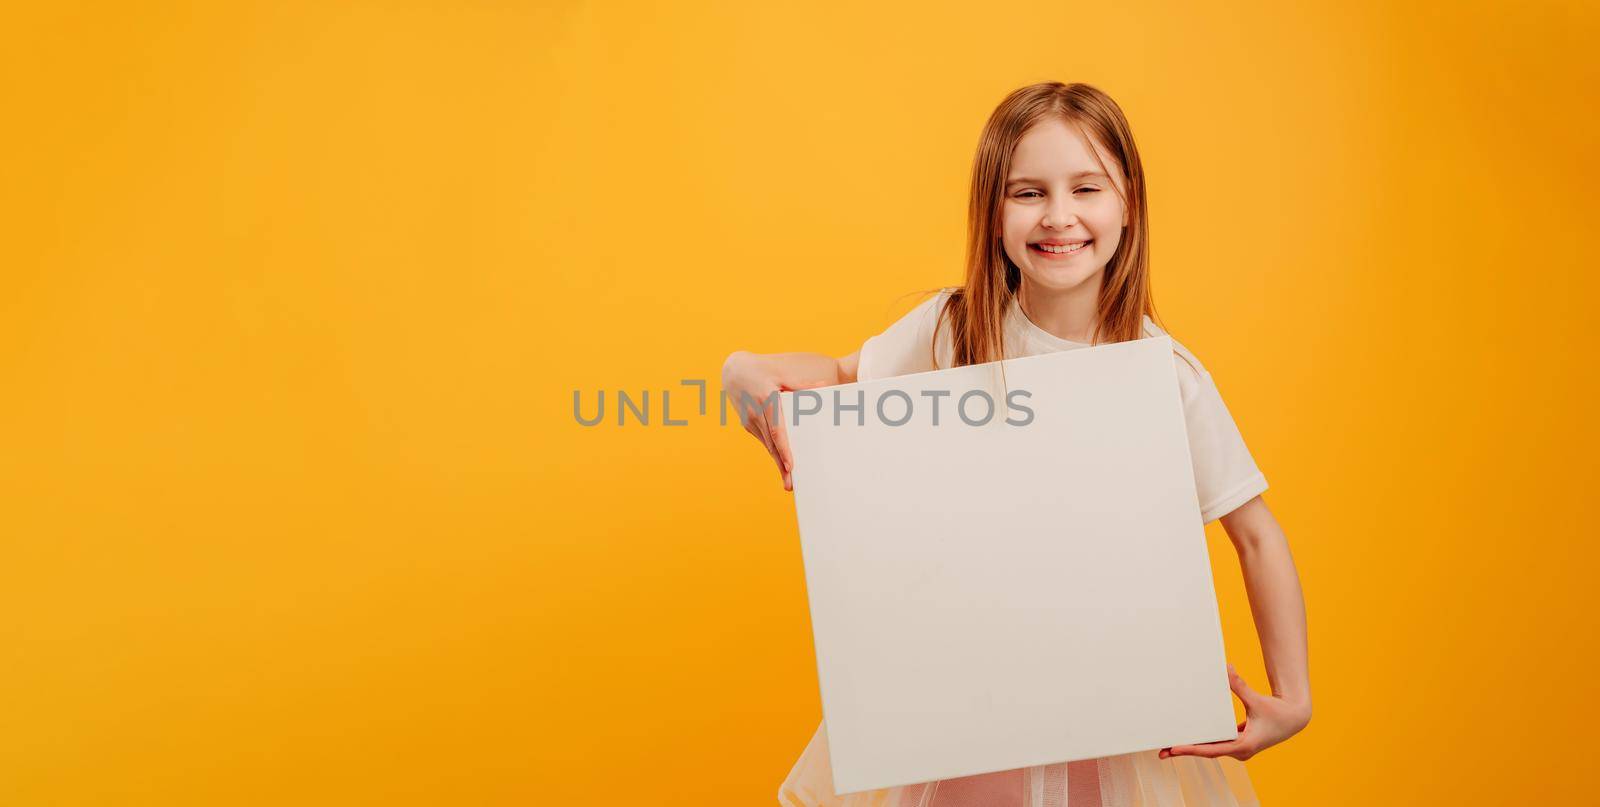 Beautiful girl child holding white canvas and looking at the camera isolated on yellow background with copyspace. Horizontal portrait of kid holding linen with place for text and smiling